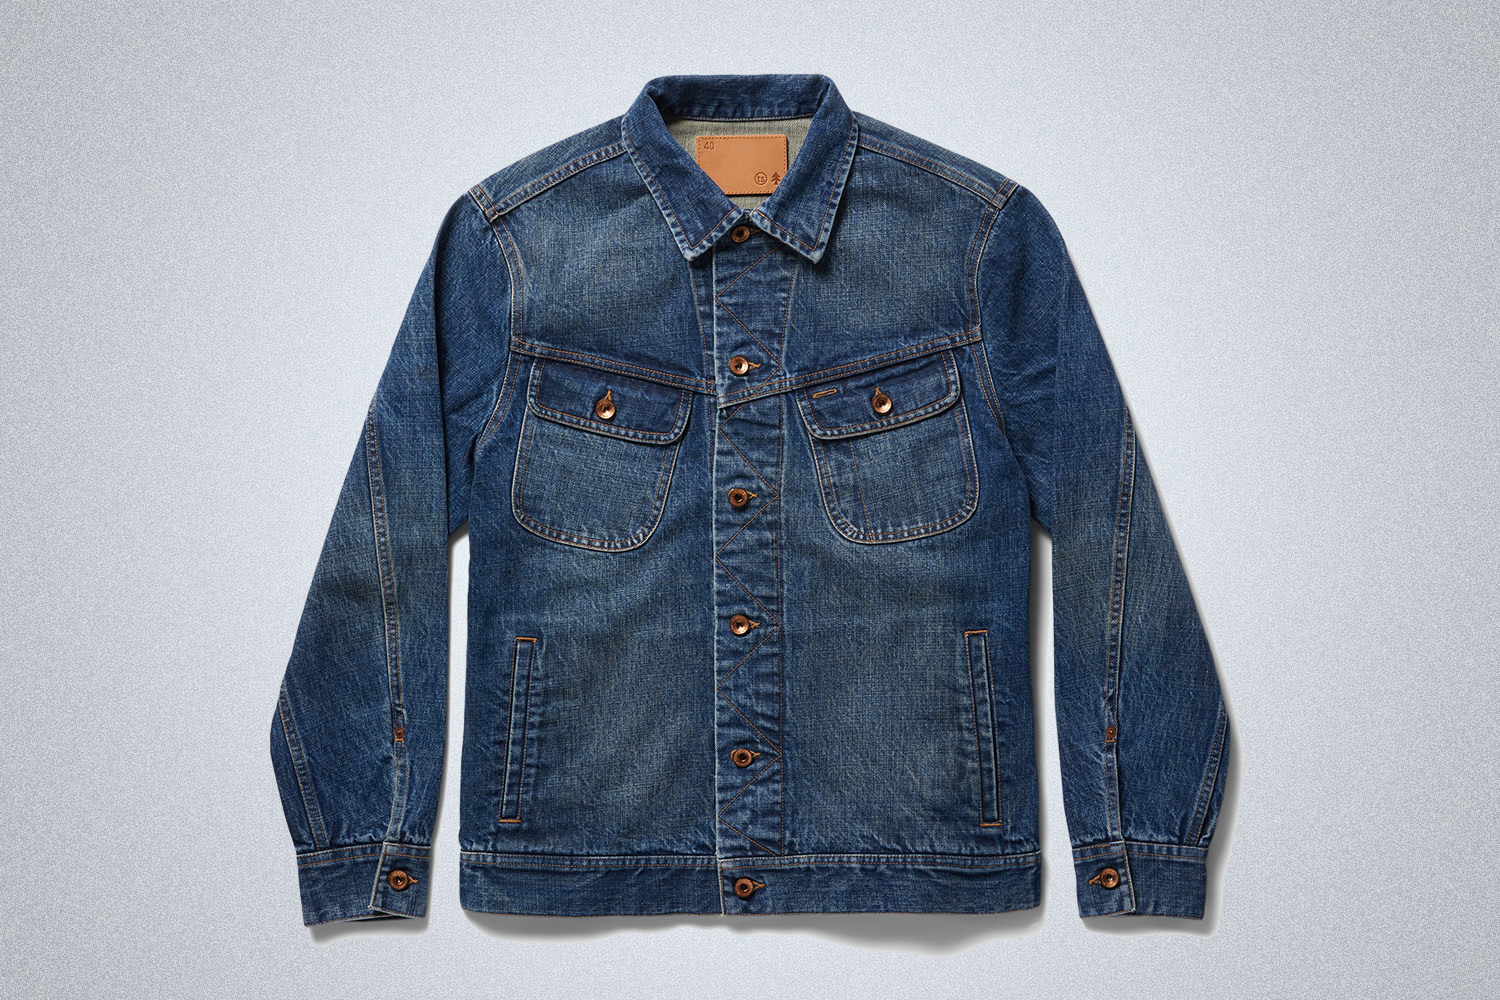 The men's Long Haul 18-Month Wash Jacket from Huckberry and Taylor Stitch